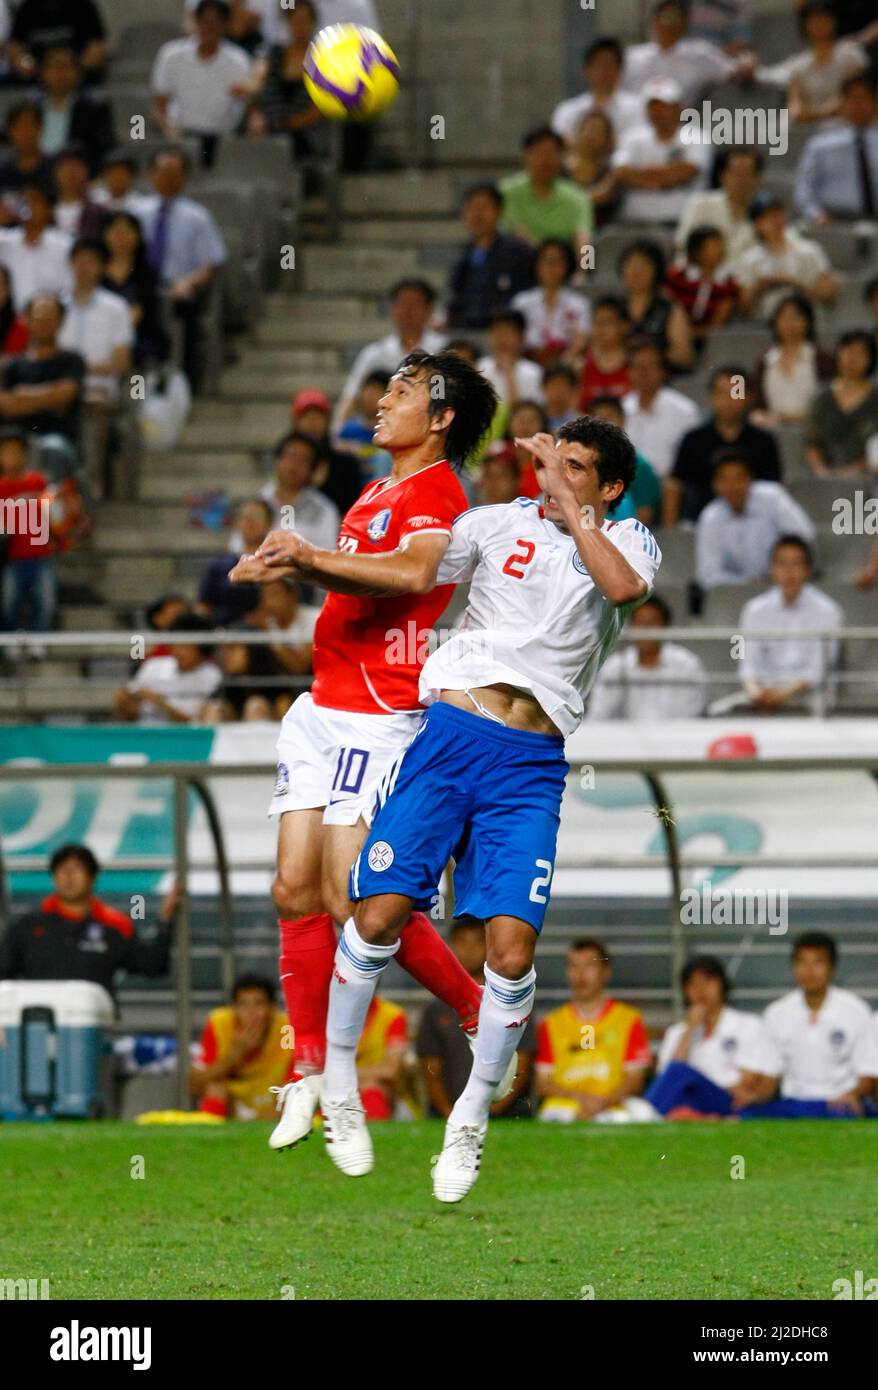 Aug 12, 2009-Seoul, South Korea-Park Chu-Young(l), South Korea, and Marcos Caceres, Paraguay, compete for the ball during the international friendly match between South Korea and Paraguay at Seoul Worldcup stadium on August 12, 2009 in Seoul, South Korea. Stock Photo